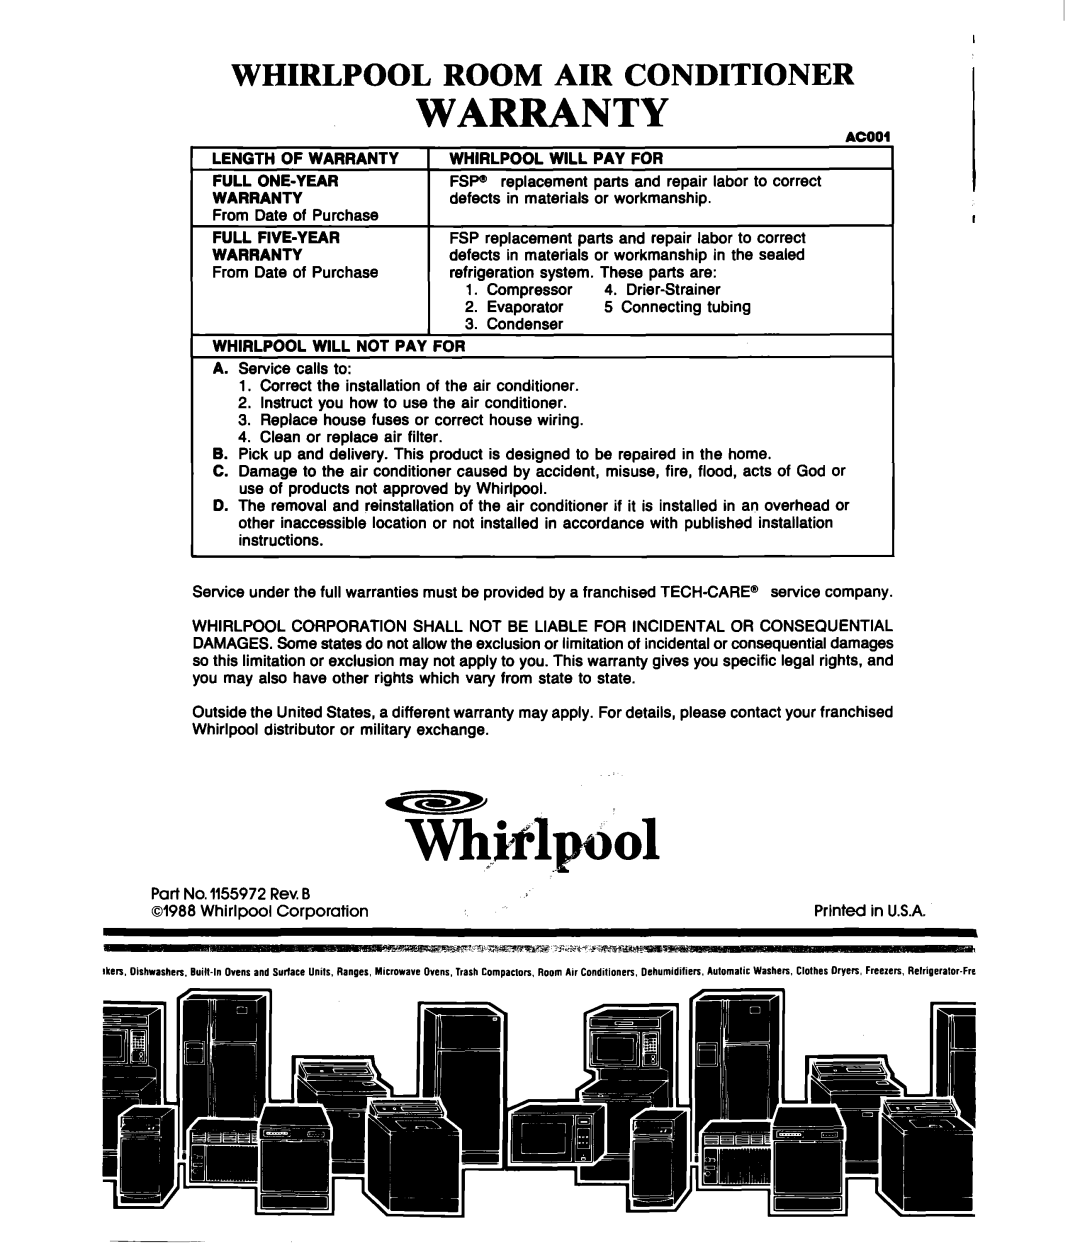 Whirlpool ACE082XS0 manual Warranty, Whirlpool Room Air Conditioner 